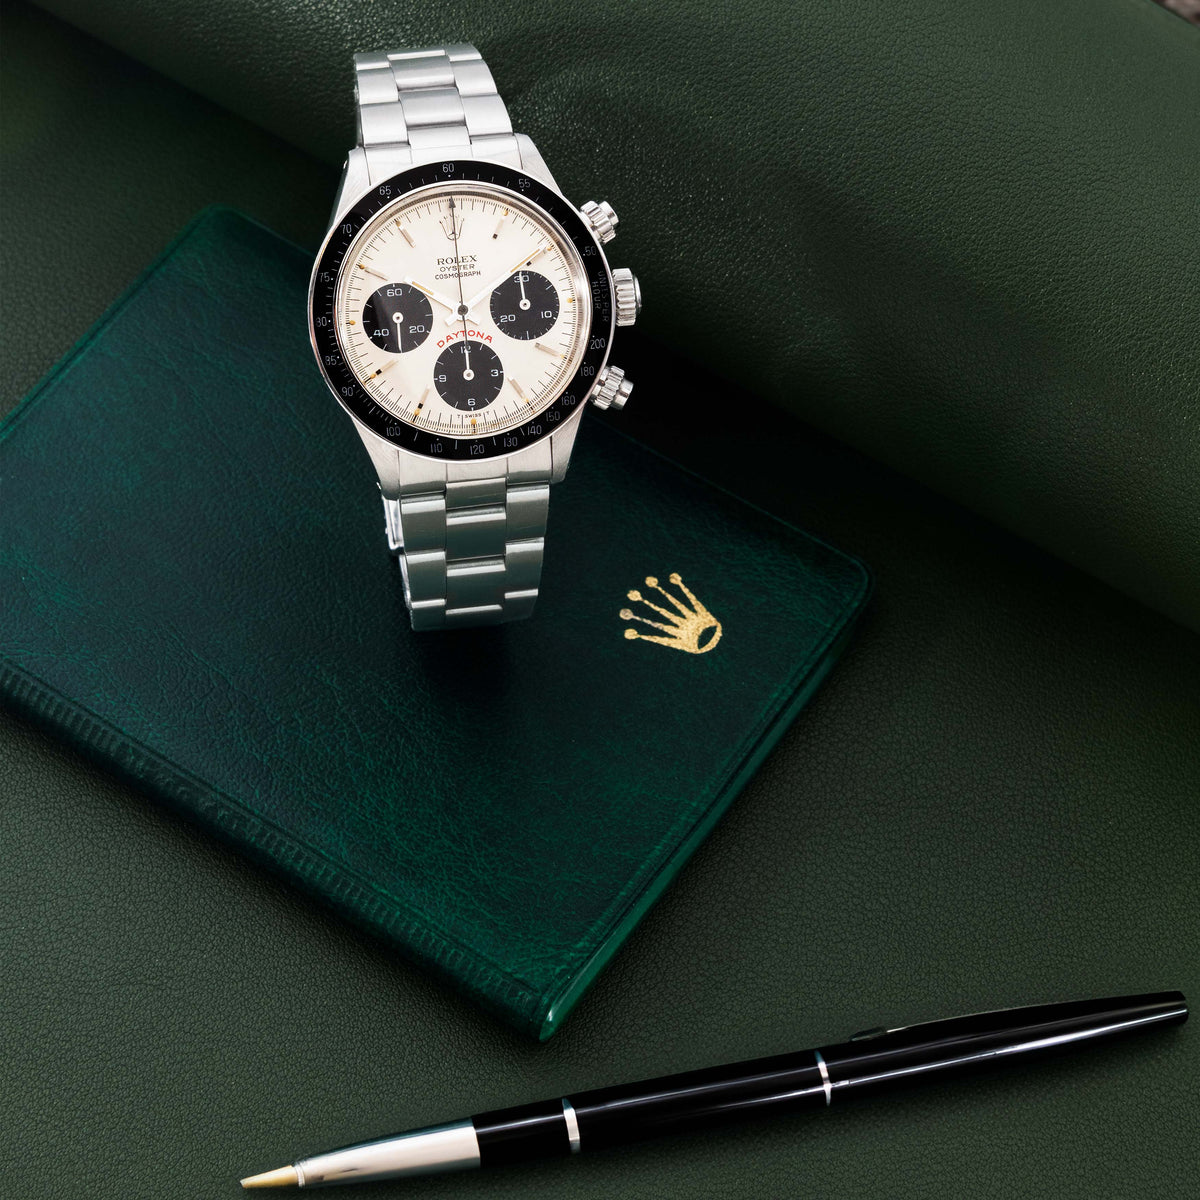 1979 Rolex Daytona Silver Dial Ref.  6263 (with Certificate)